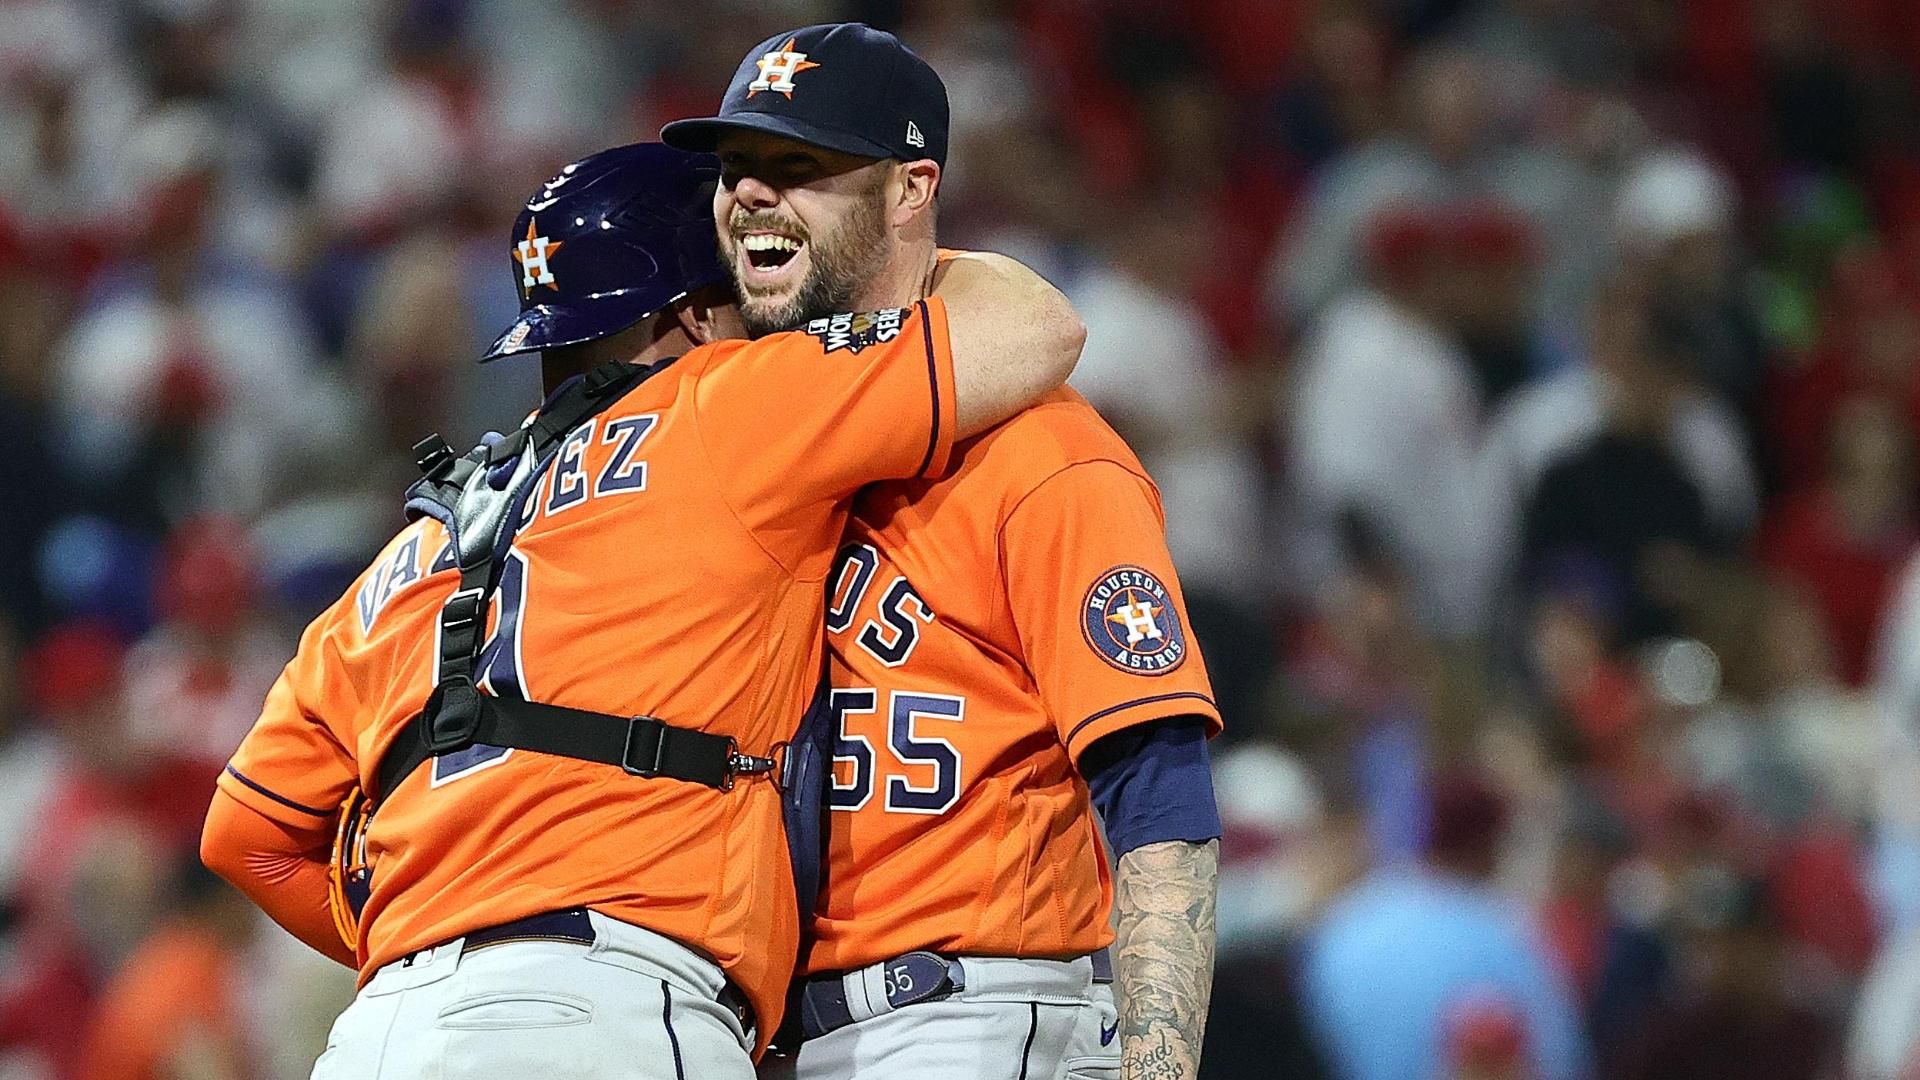 Astros' catcher Christian Vazquez speaks on his first career no-hitter  caught